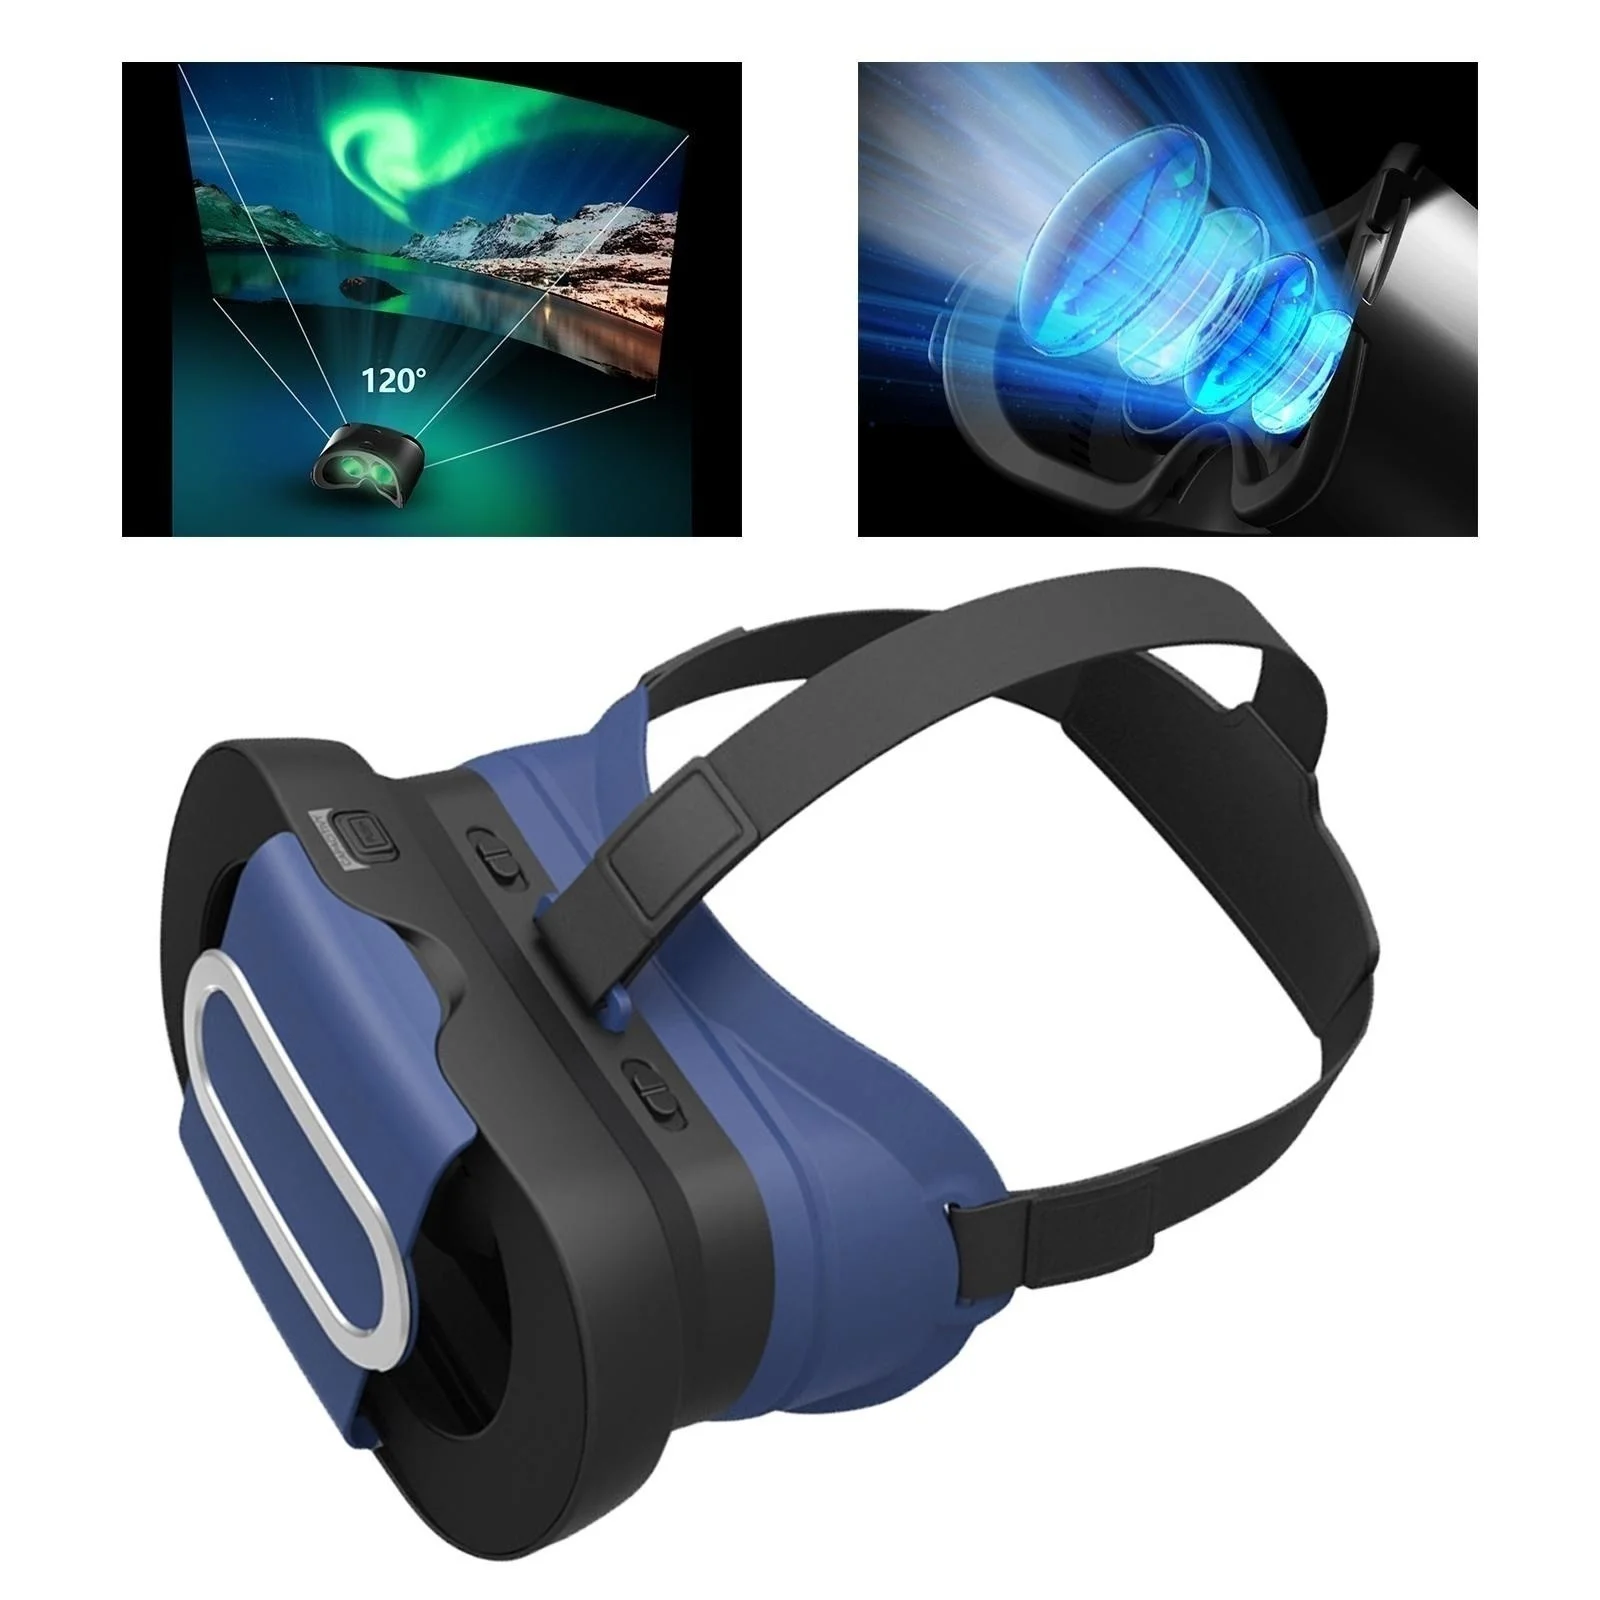 

Foldable VR Virtual Reality 3D Interpupillary Distance Adjustment Glasses AR Headset Anti Blue Light For IOS Android Smartphone